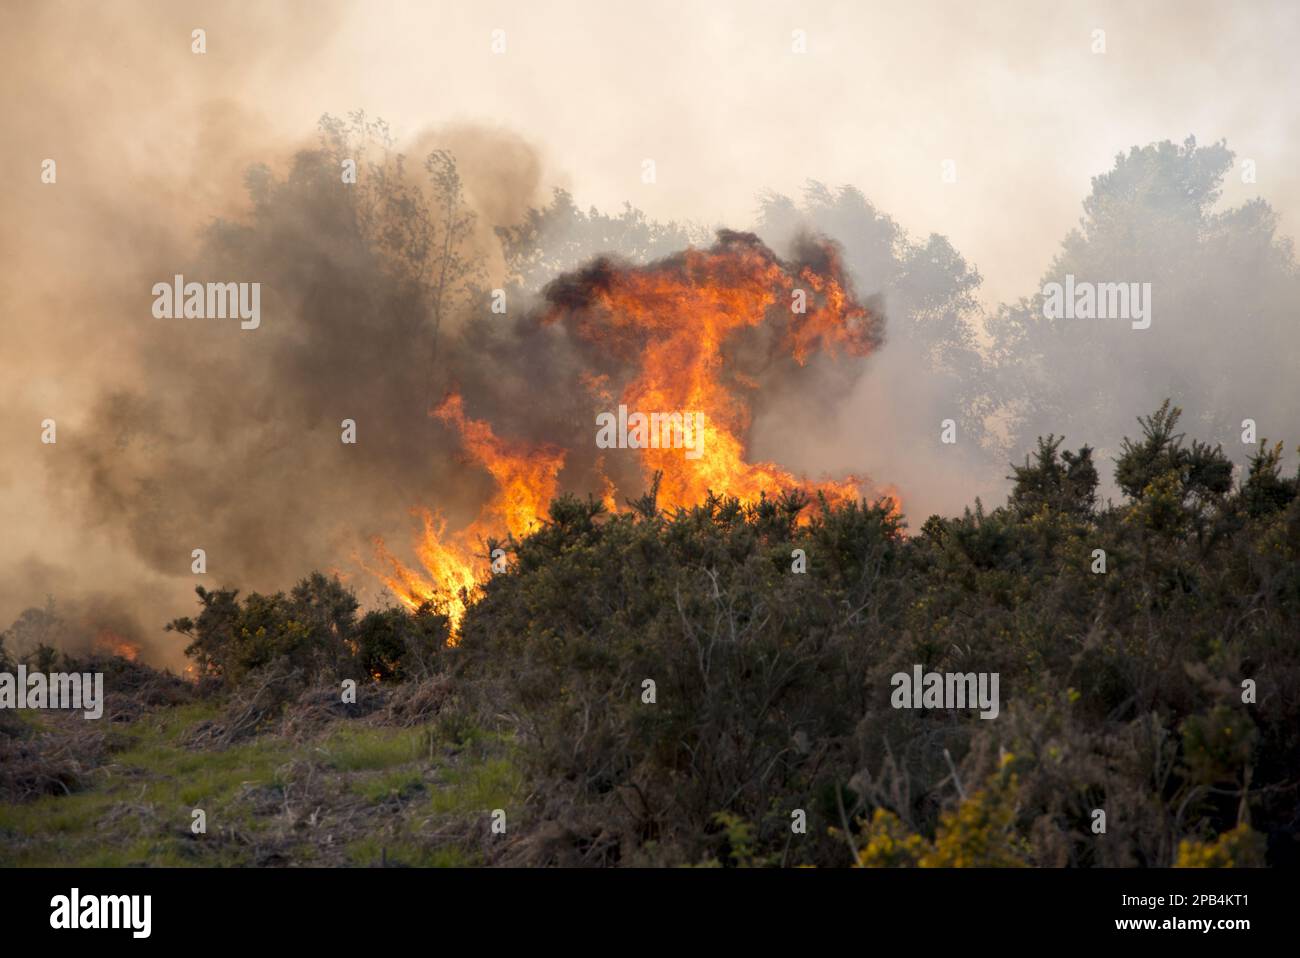 Fire on heathland, caused either by carelessness or arson, Ashdown Forest, East Sussex, England, United Kingdom, Europe Stock Photo